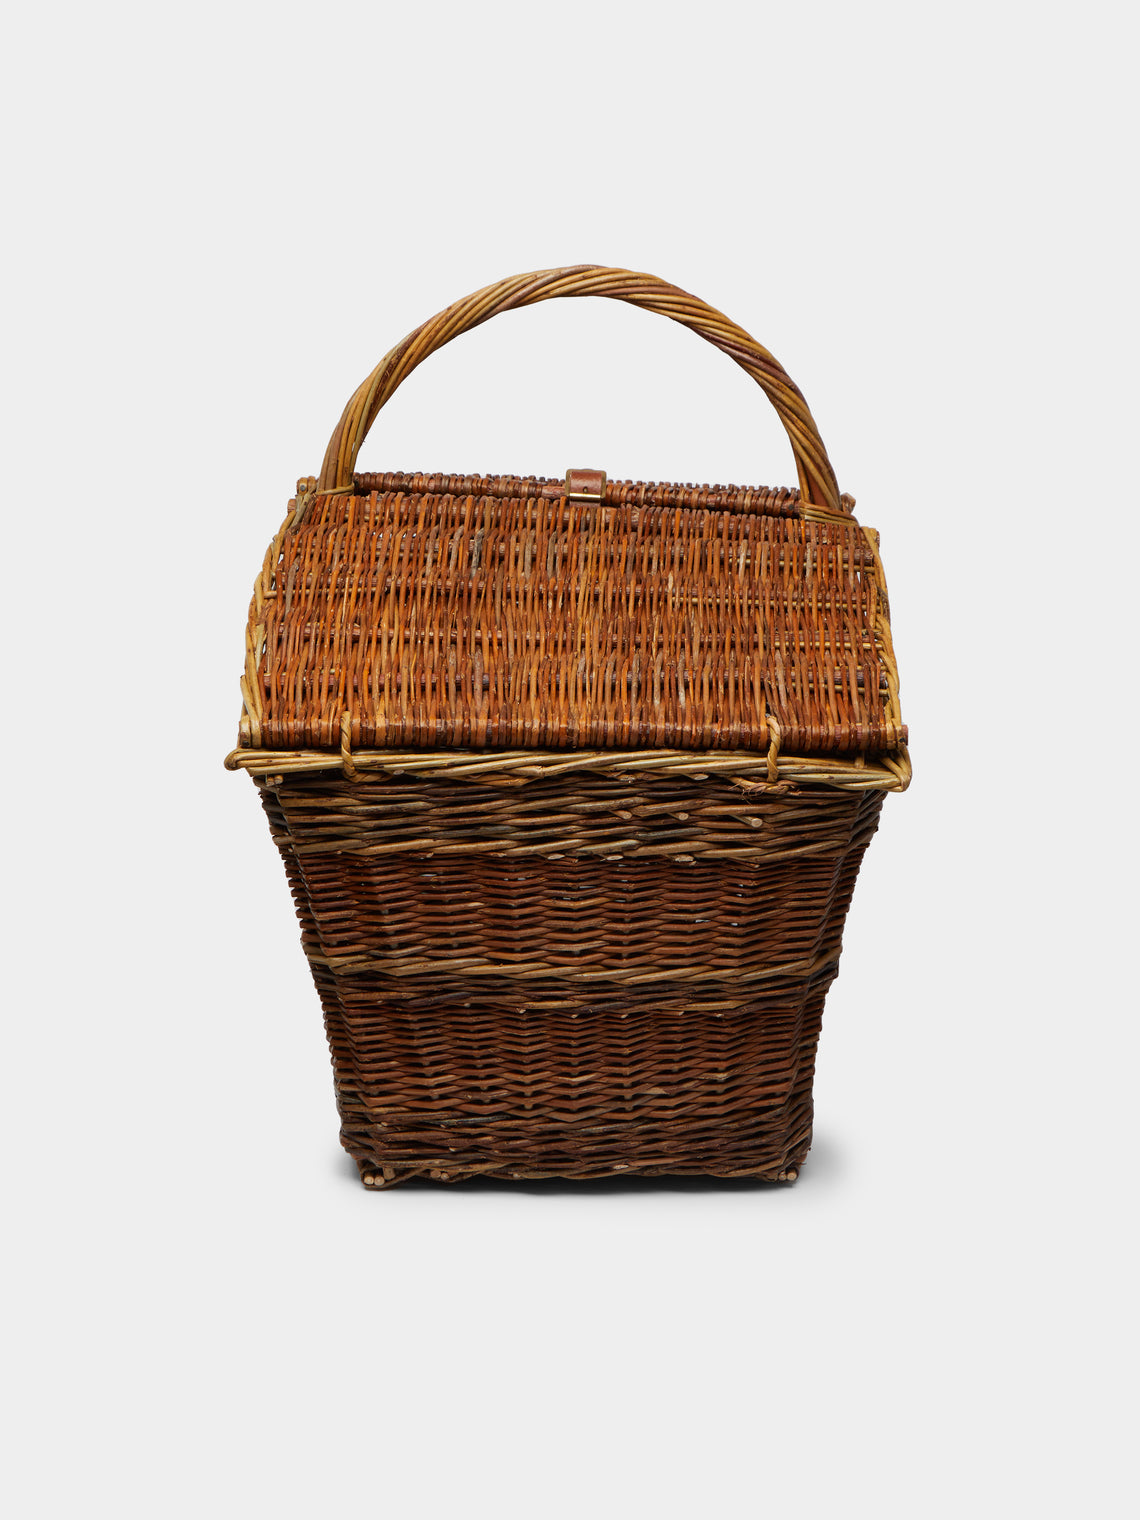 Sussex Willow Baskets - Handwoven Willow Shooter Picnic Basket -  - ABASK